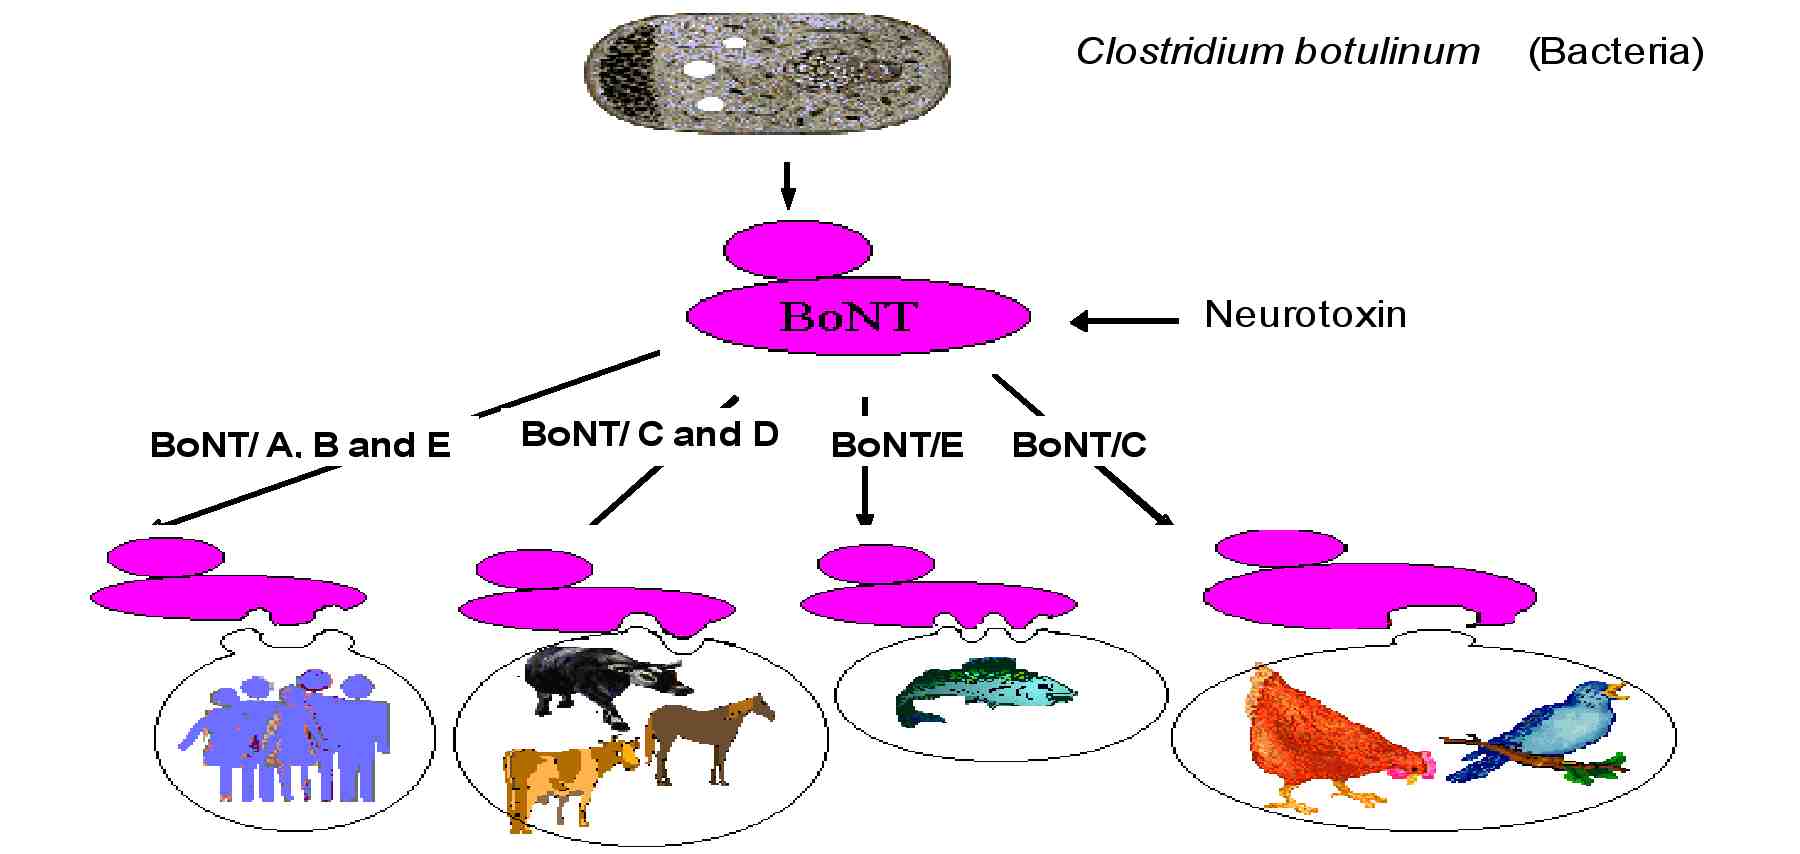 Illustration showing how botulism can spread